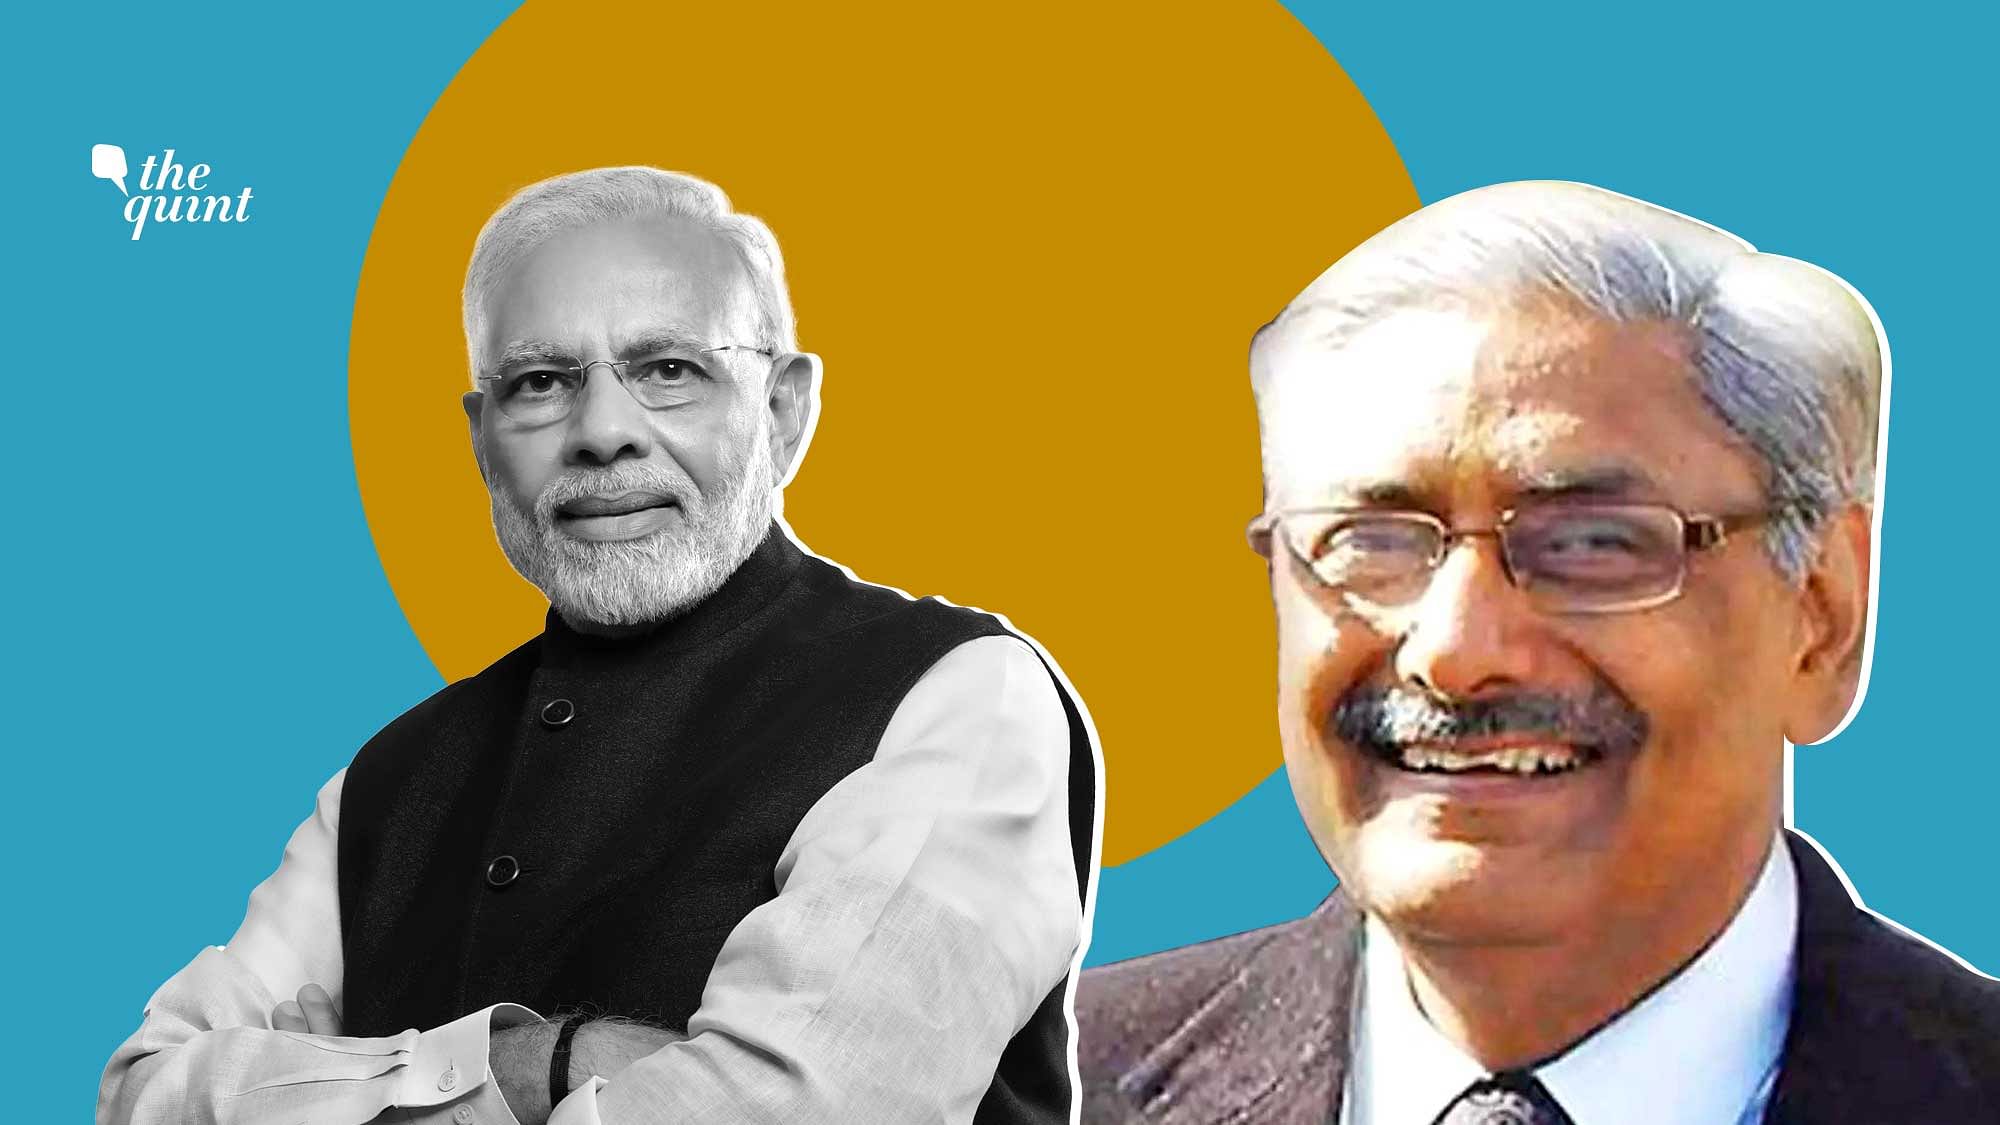 Justice Arun Mishra (R) called Prime Minister Narendra Modi (L) “a versatile genius” and an “internationally acclaimed visionary”.